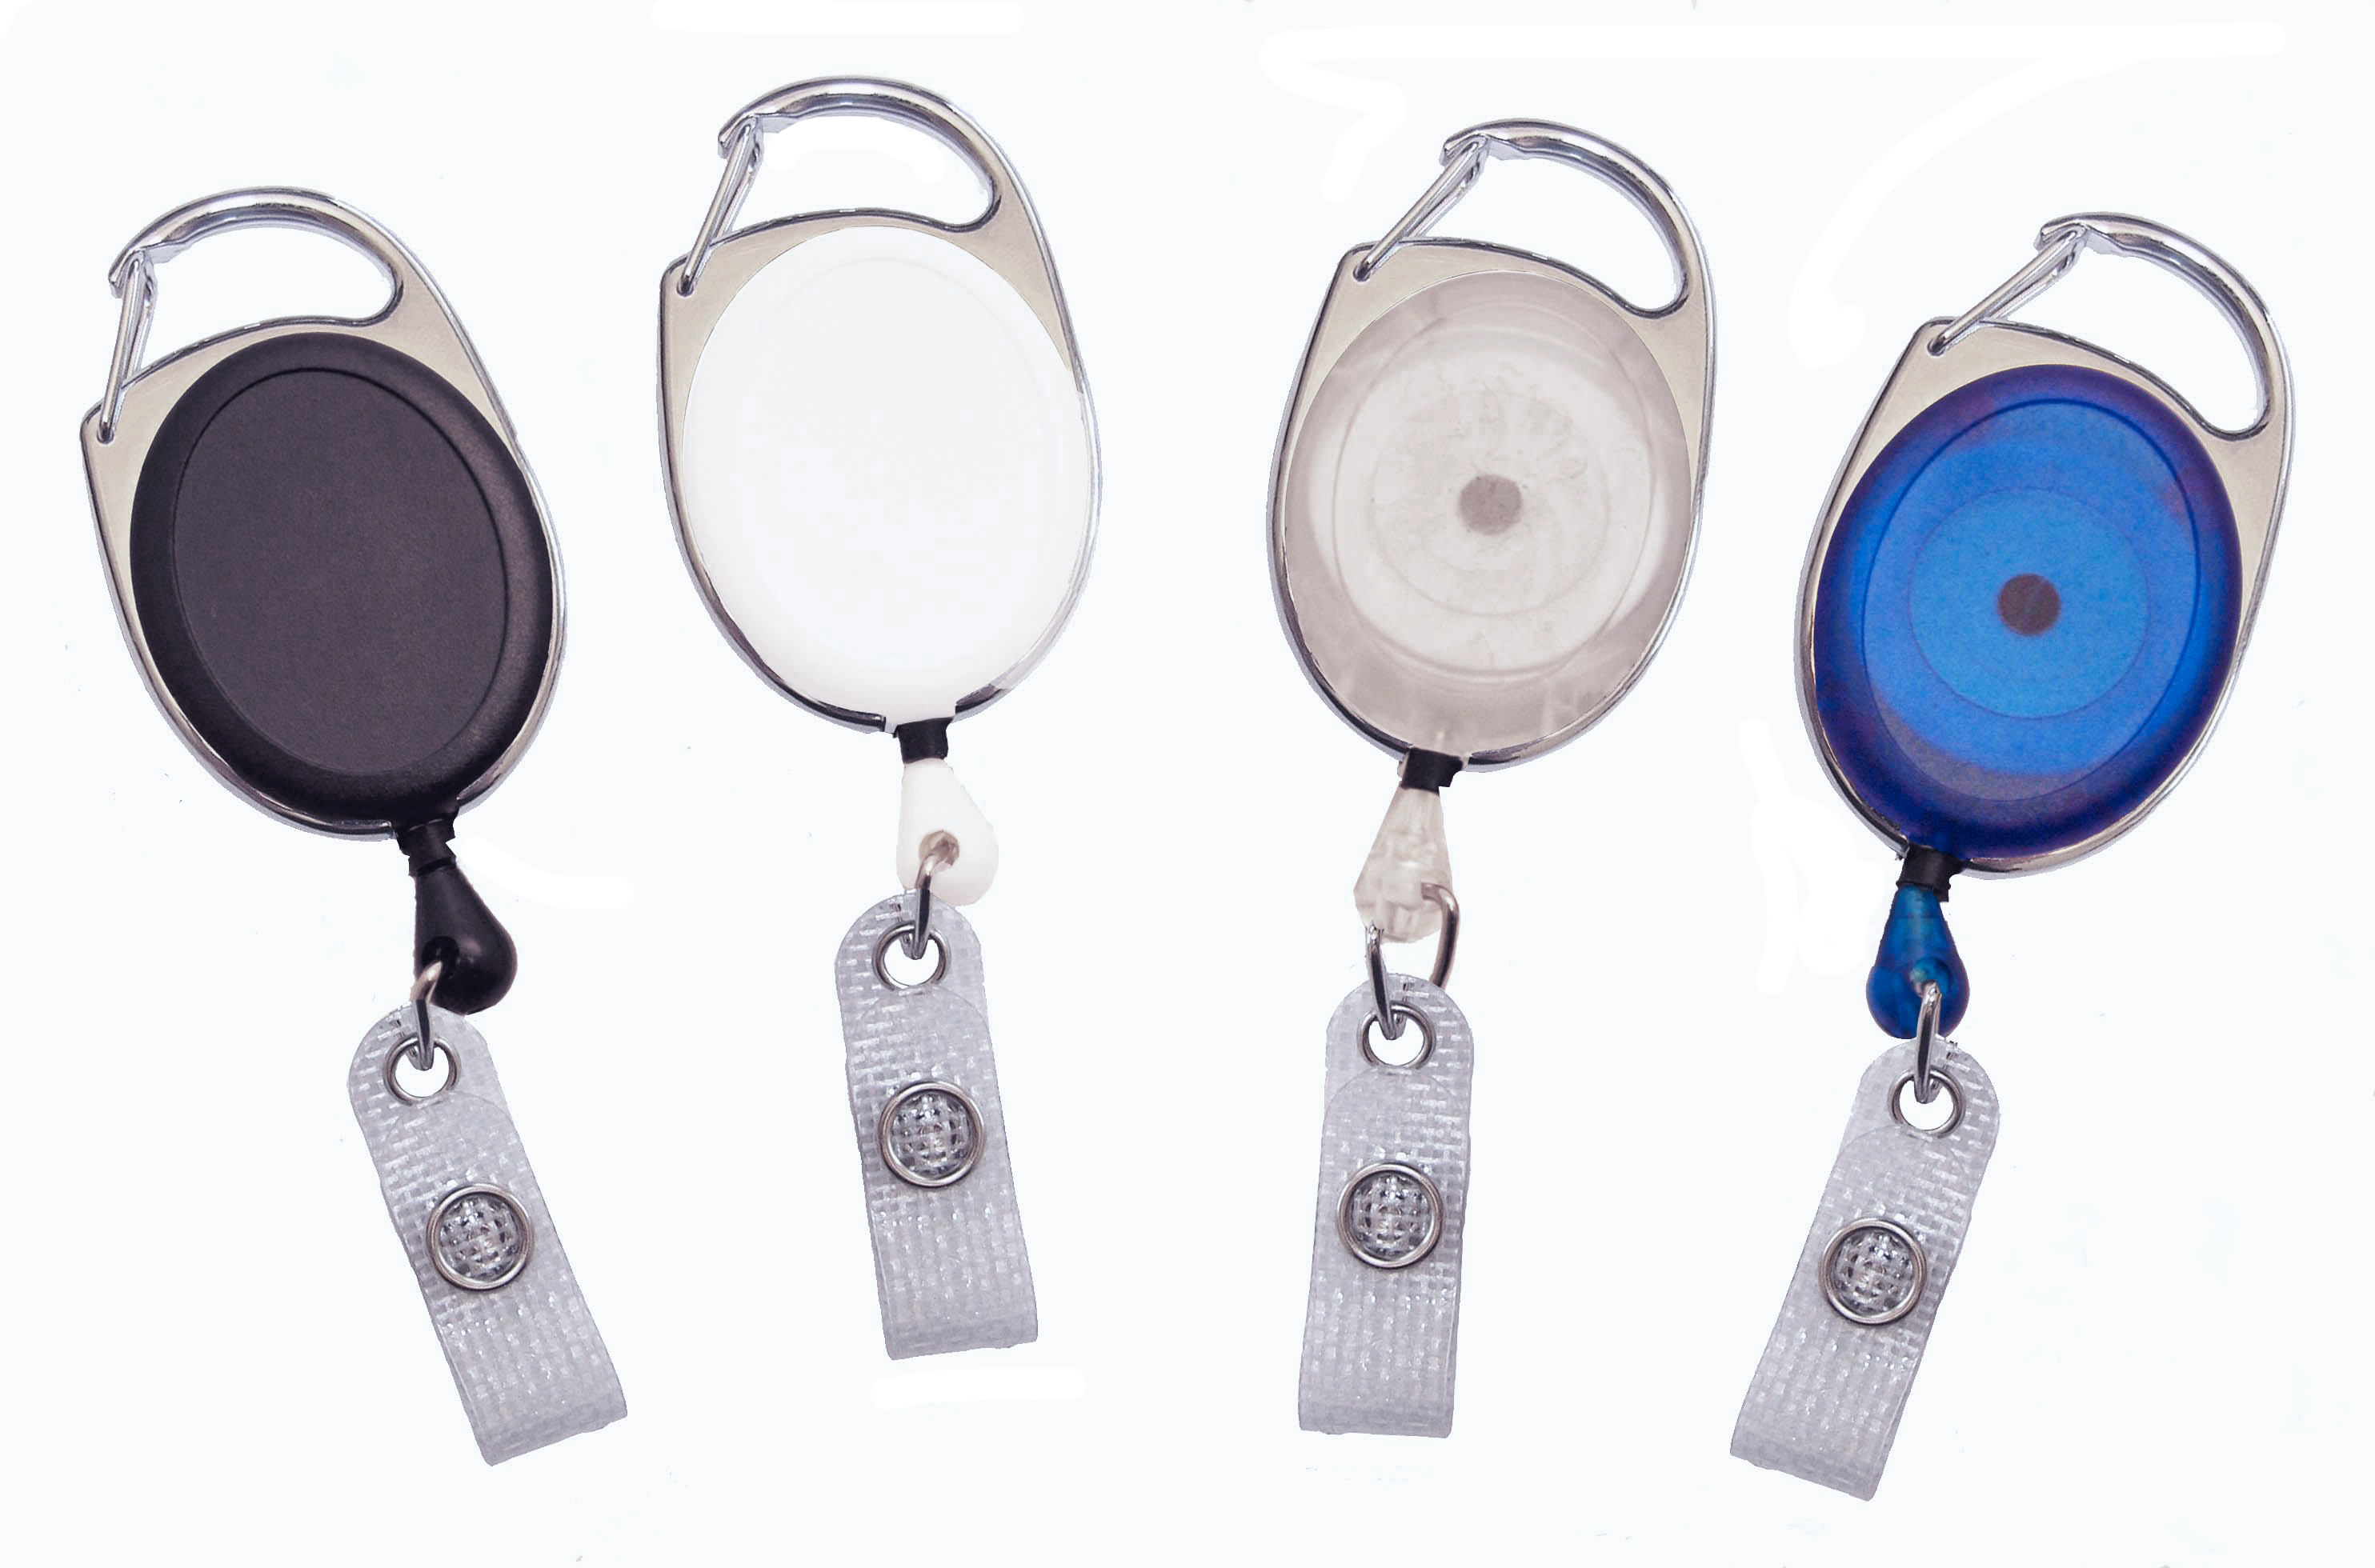 Premium badge reel with carabiner, belt clip and Dome-Label cutout